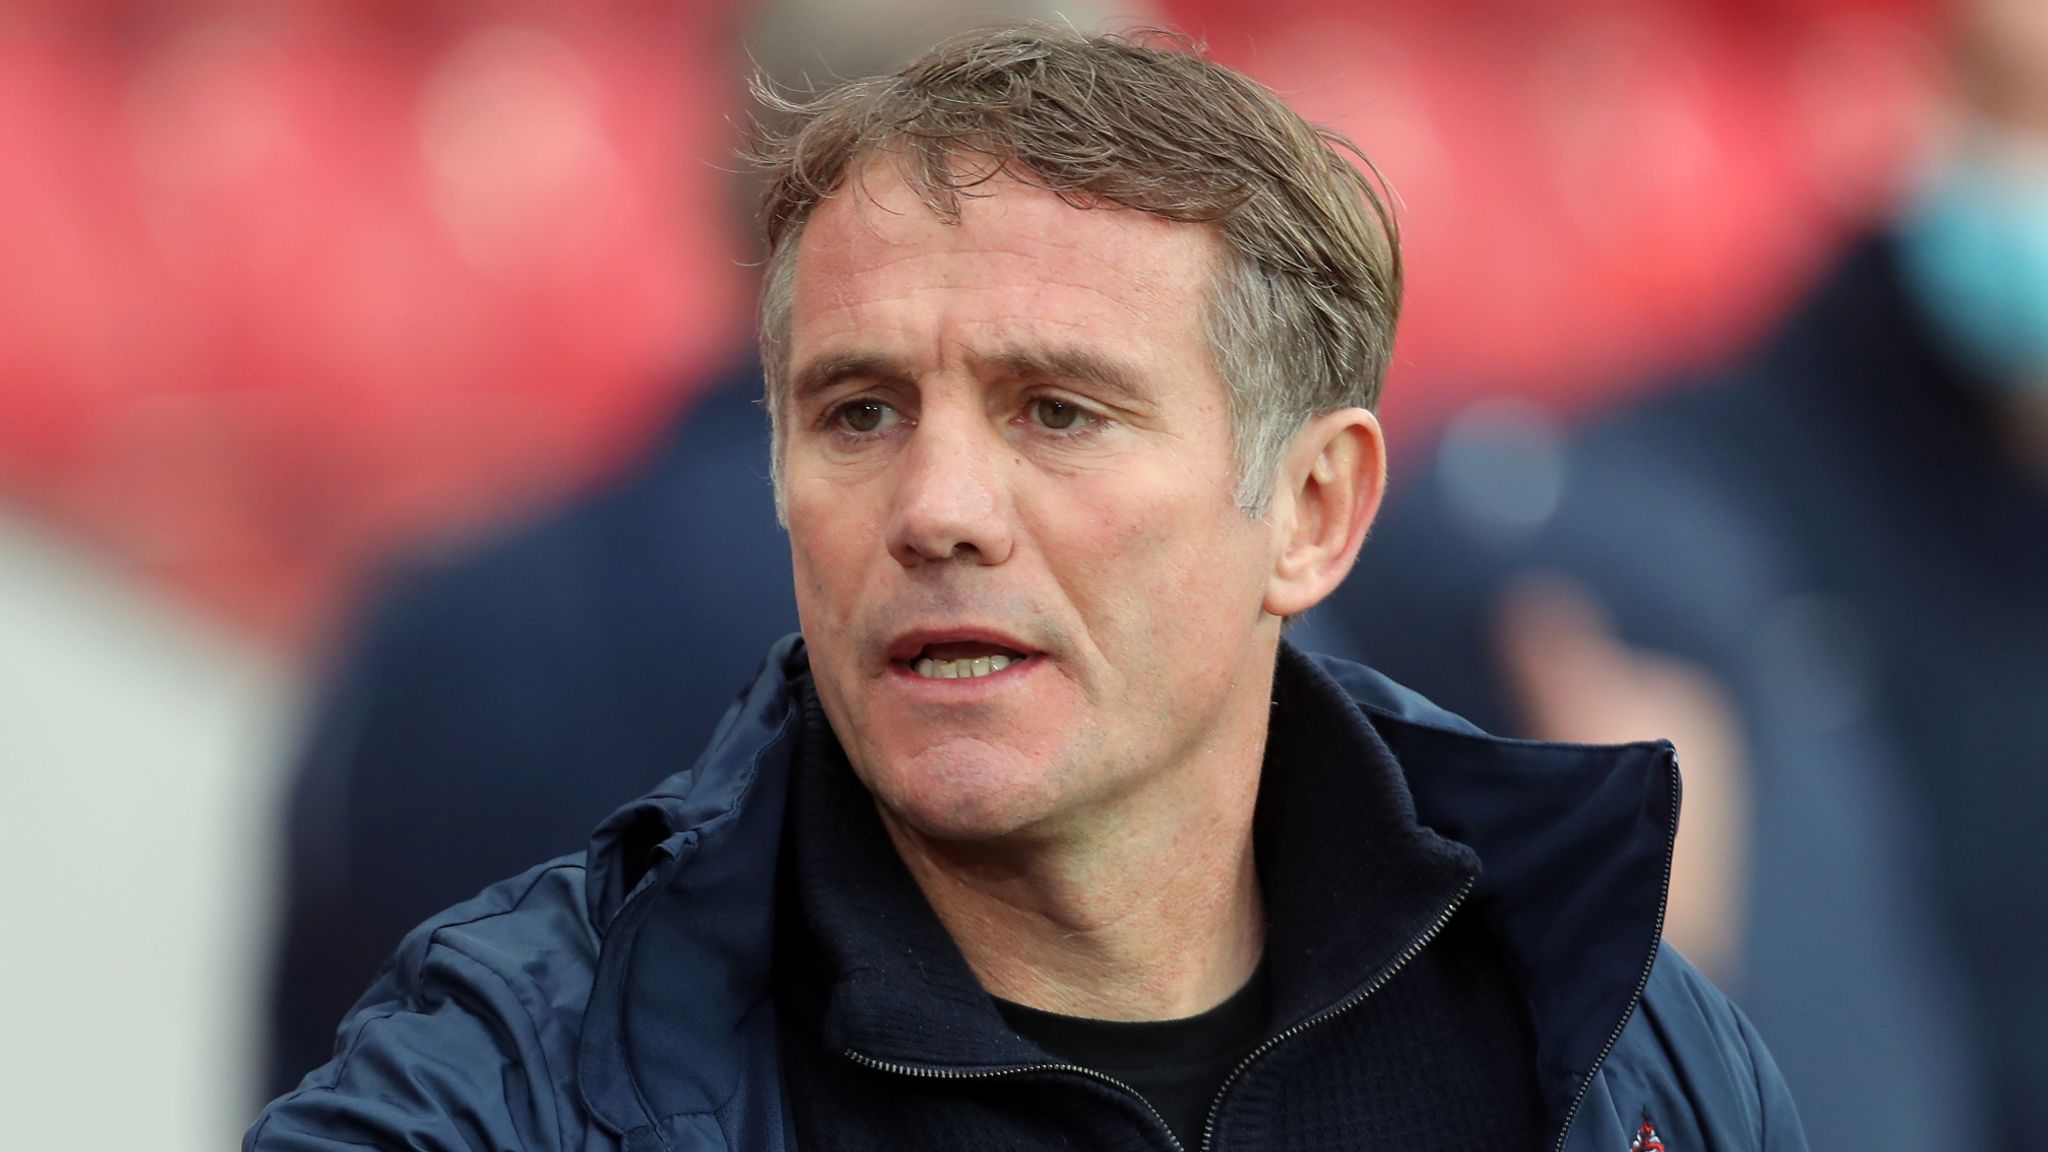 Ryan Reynolds and Rob McElhenney appoint Phil Parkinson as Wrexham manager  on 12-month rolling contract | Football News | Sky Sports